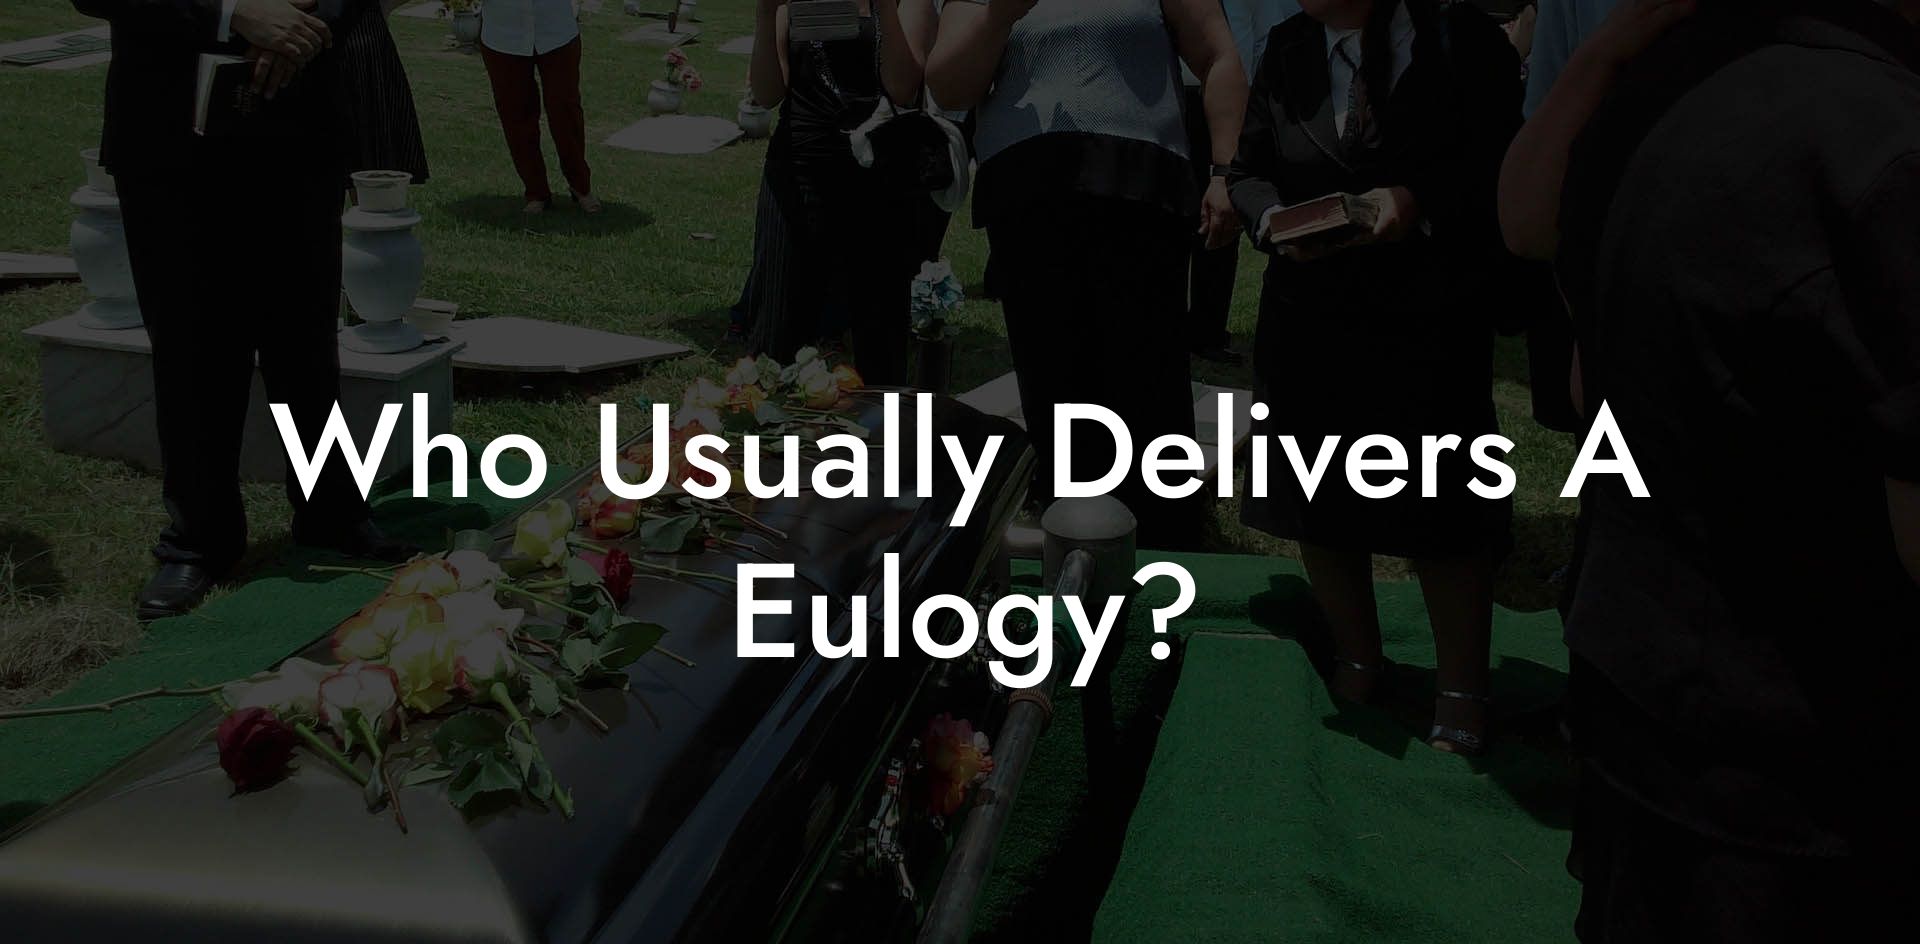 Who Usually Delivers A Eulogy?